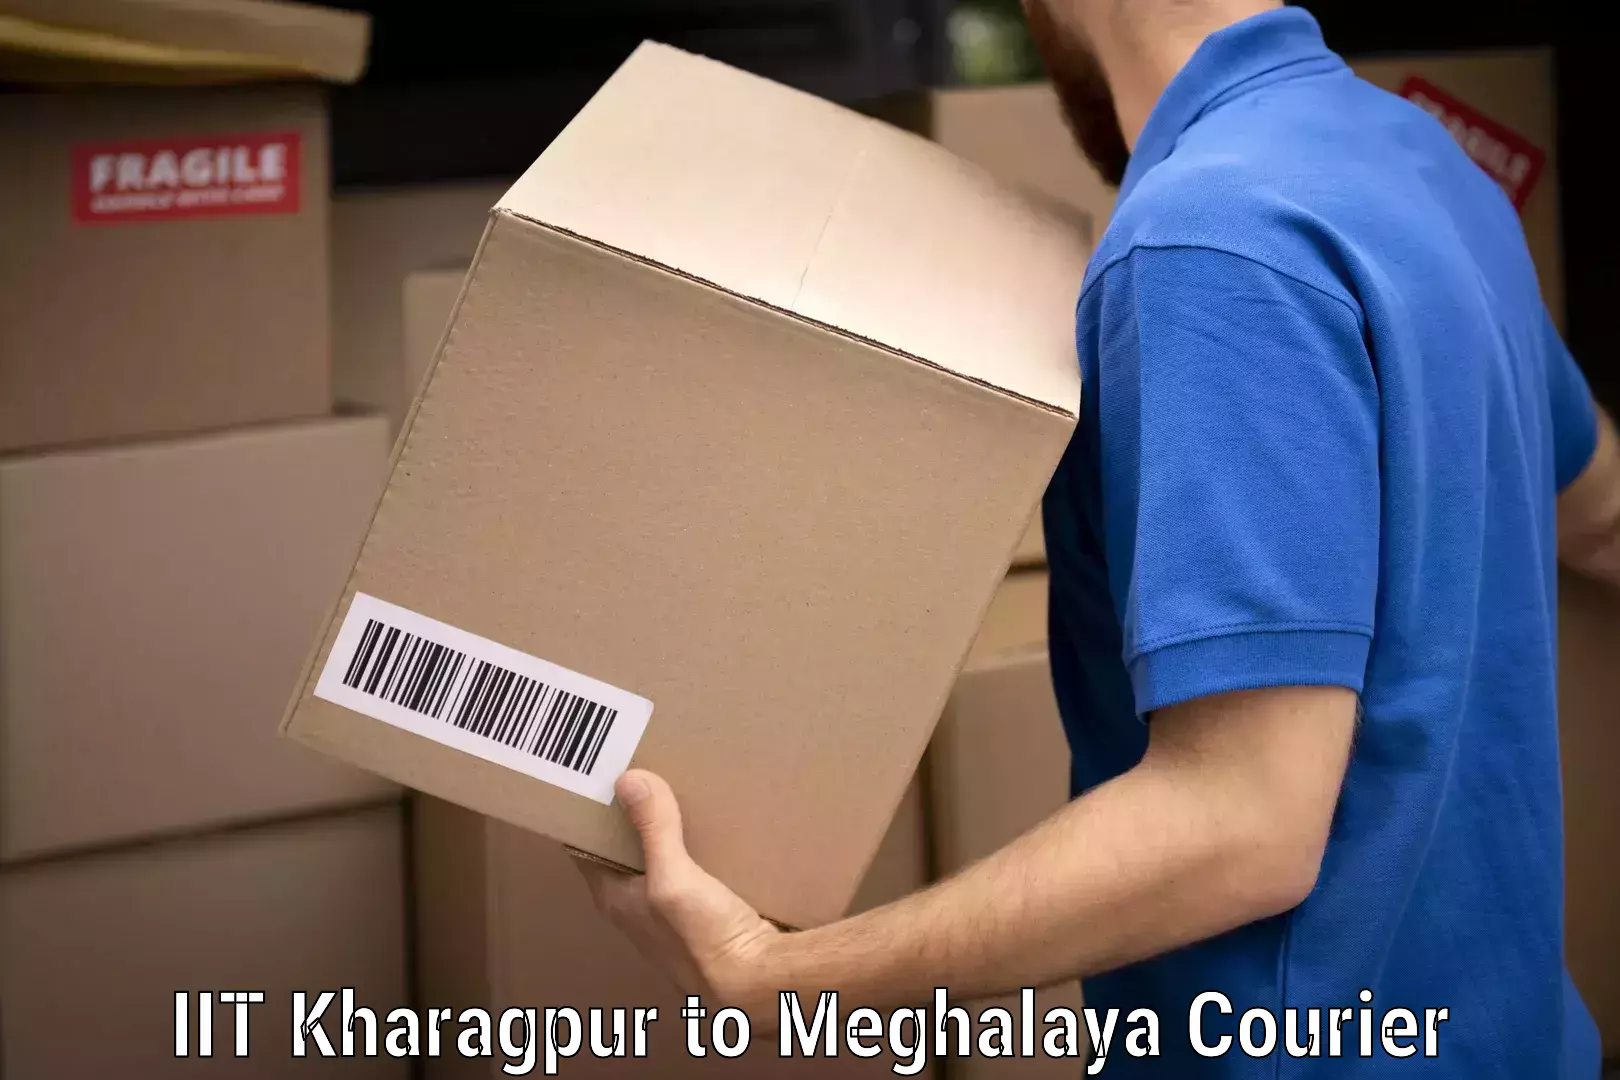 Trusted relocation experts IIT Kharagpur to Meghalaya